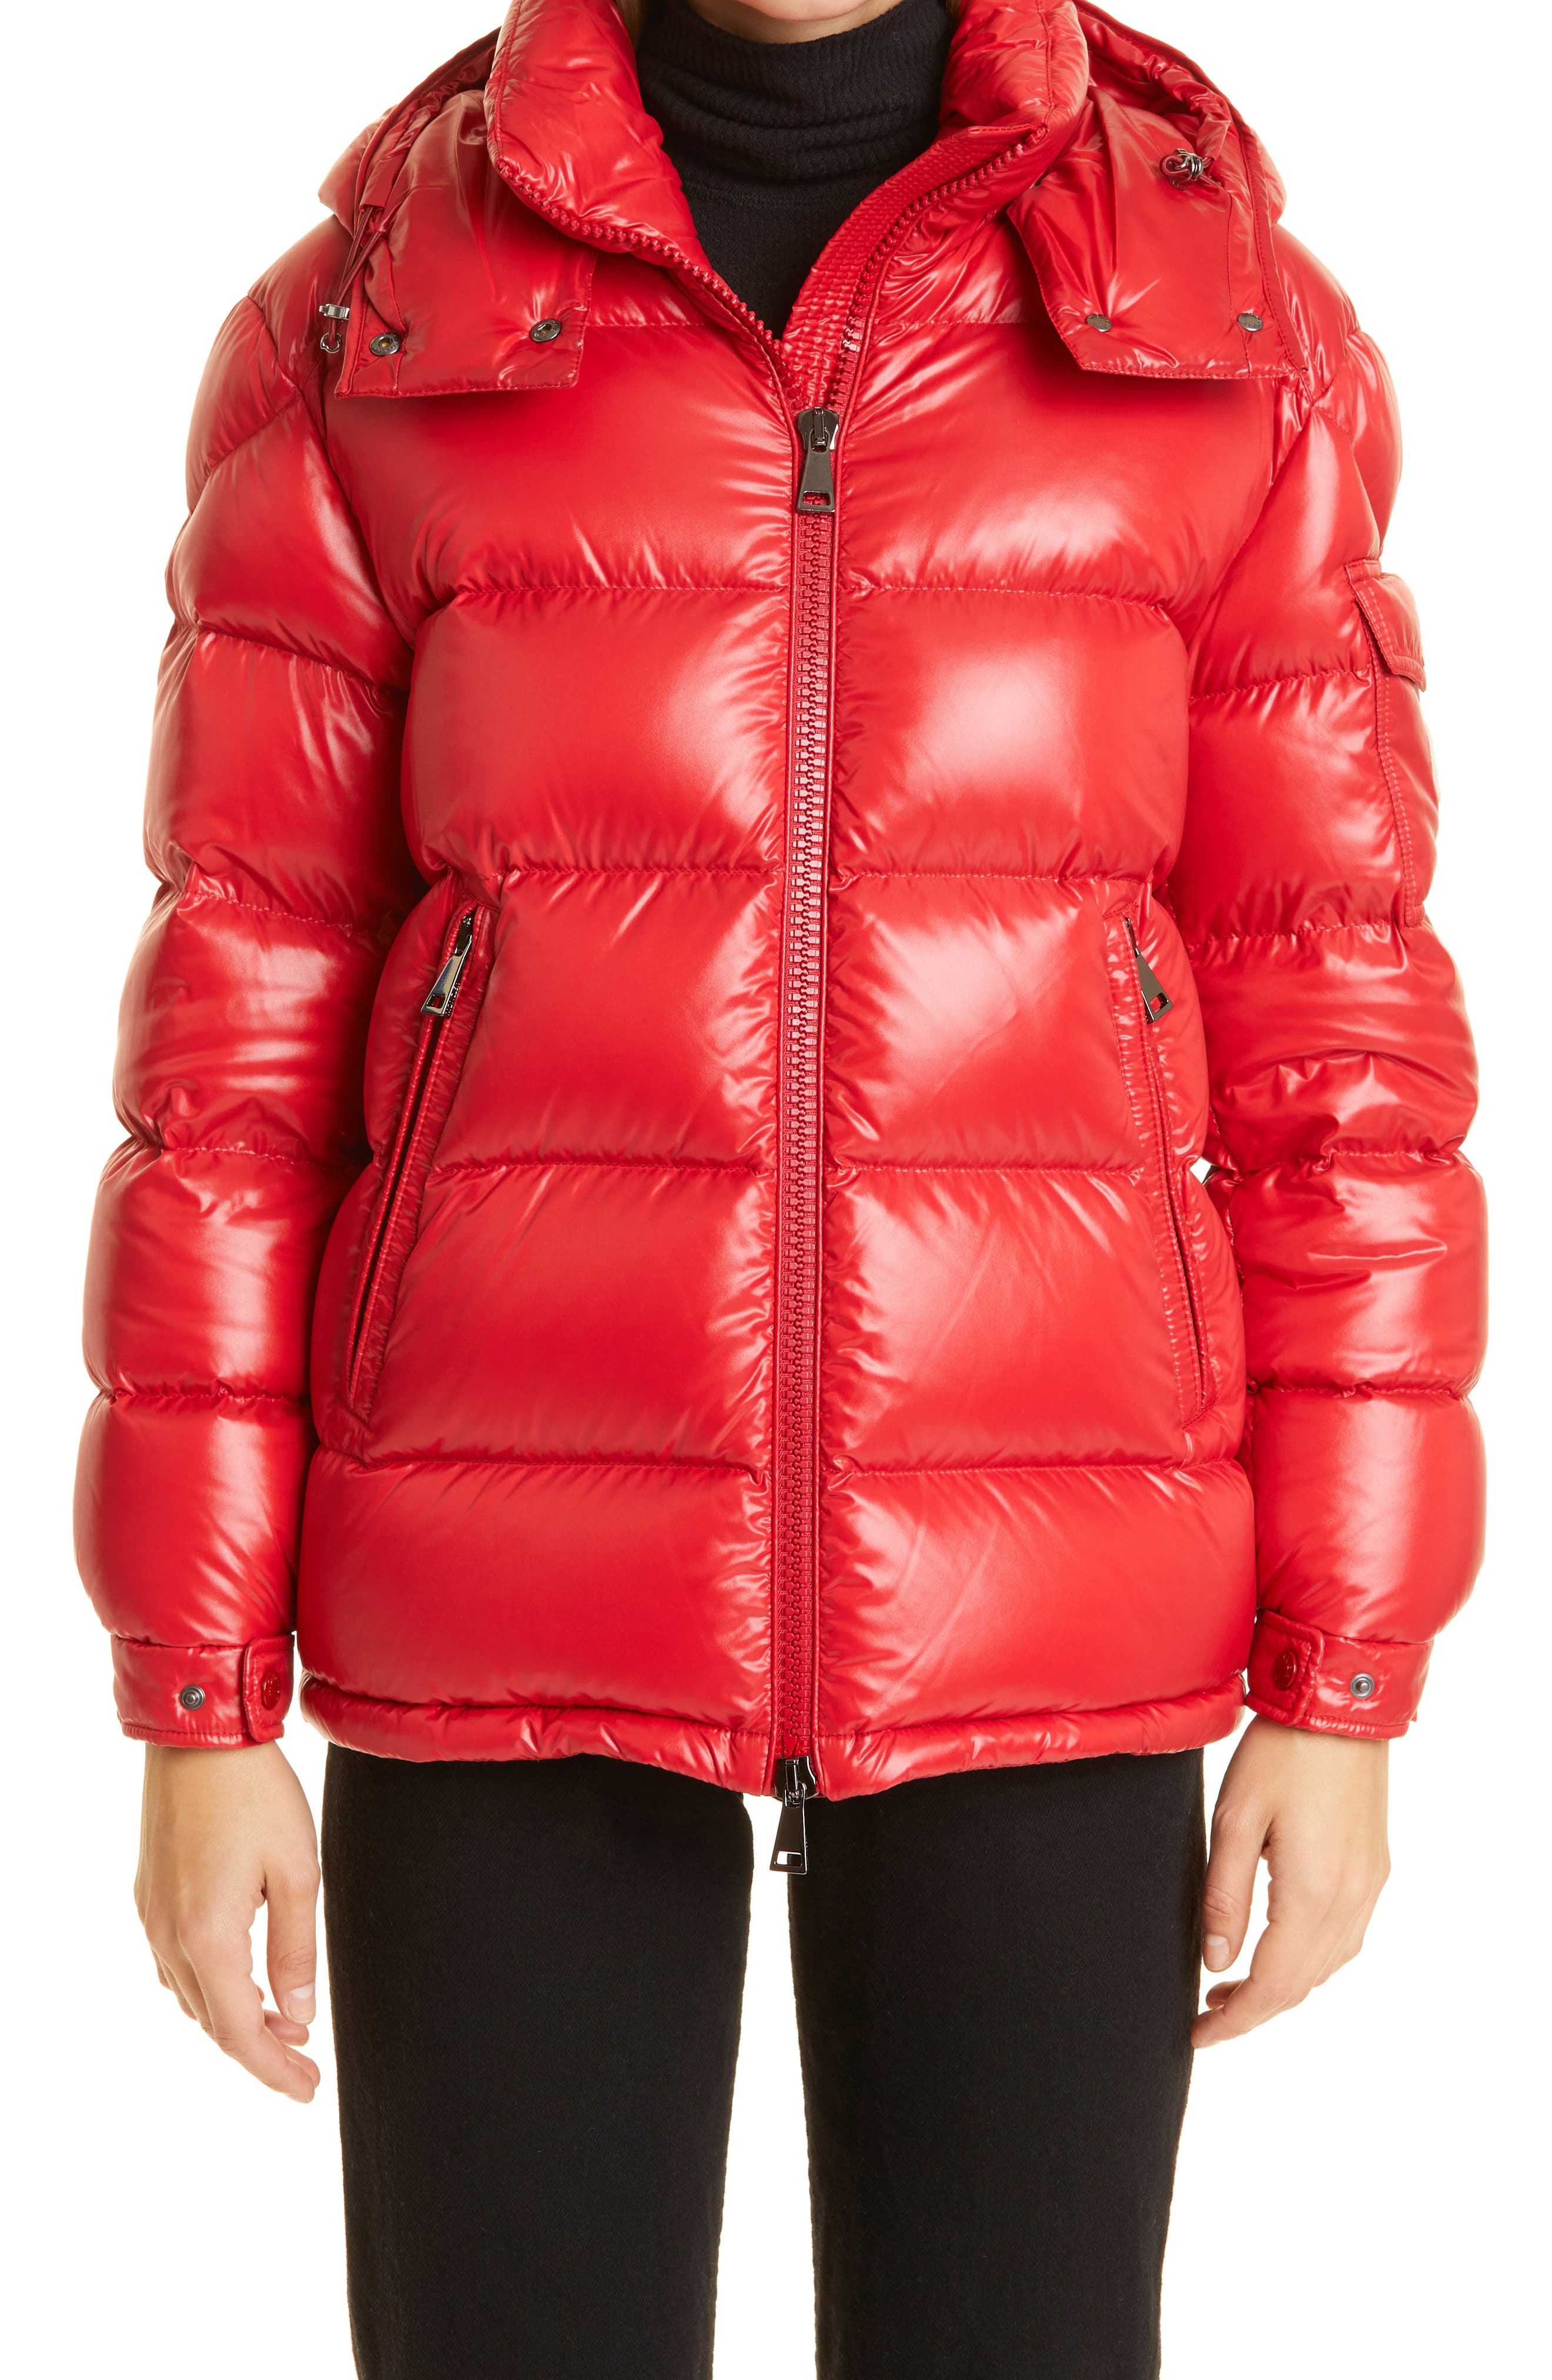 Moncler Maire Water Resistant Down Puffer Jacket in Red at Nordstrom